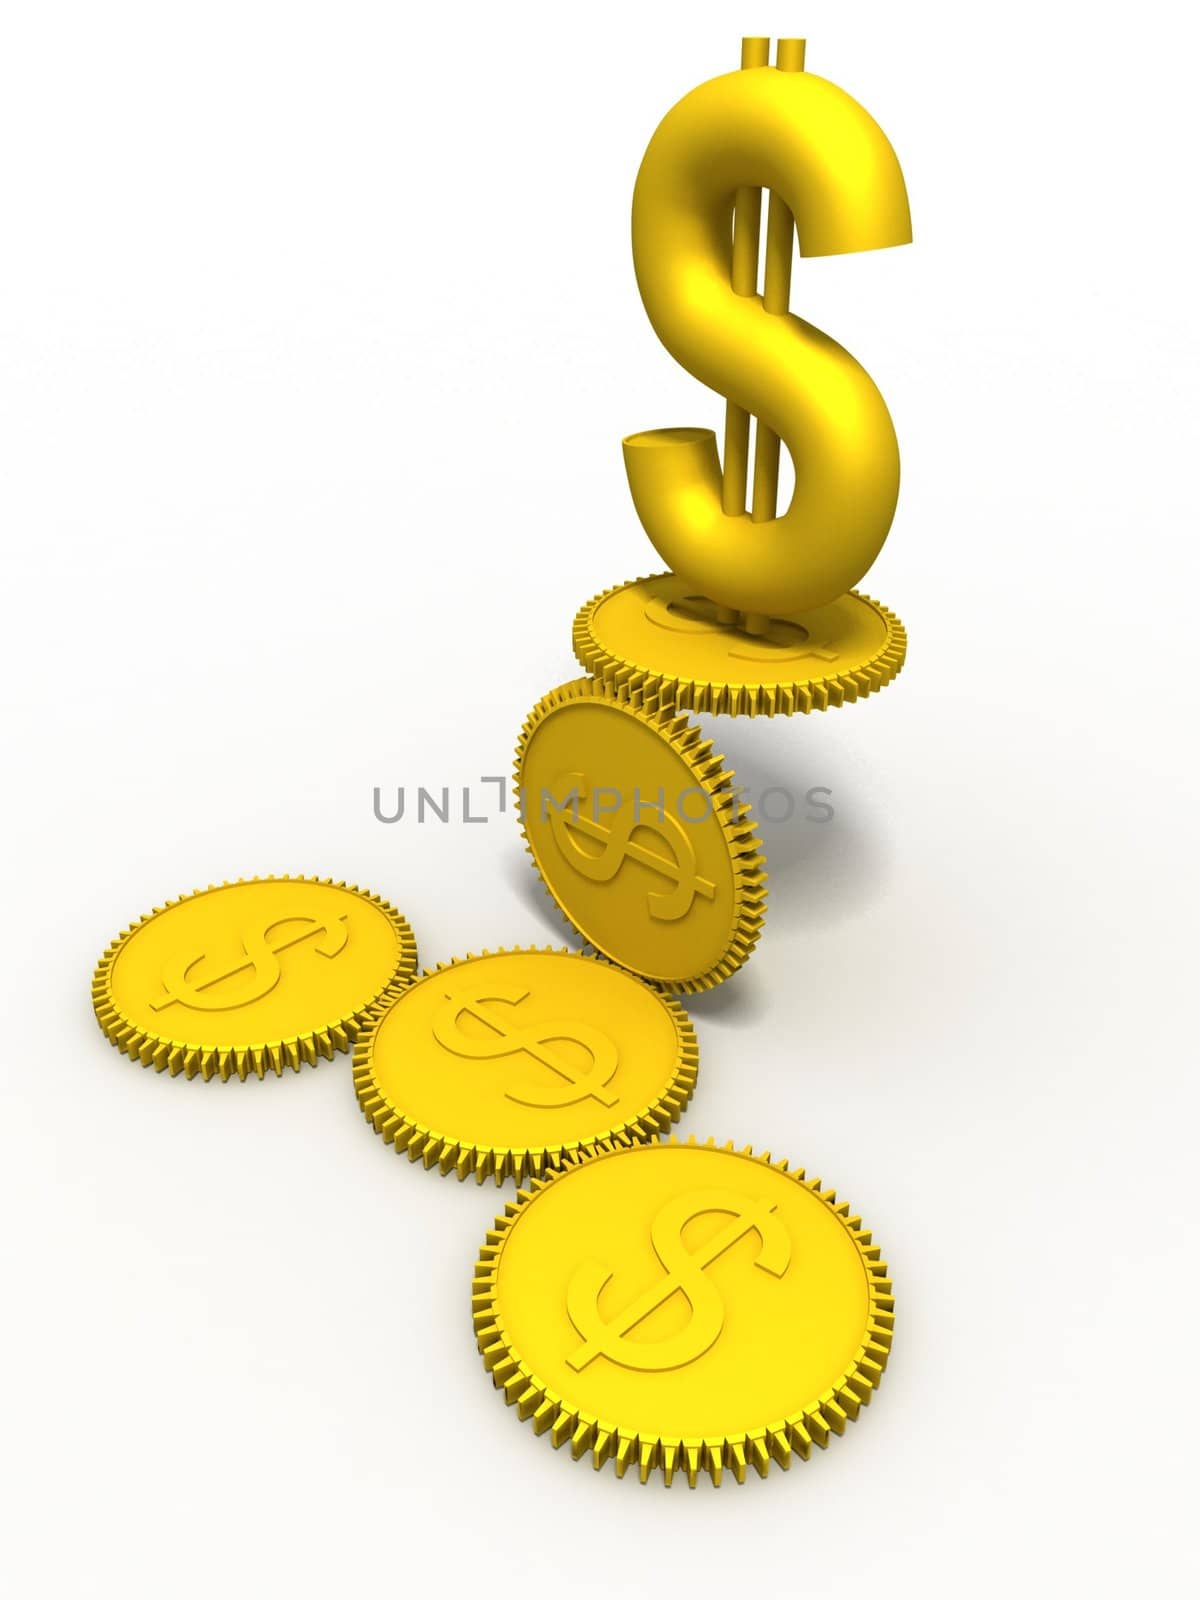 Mechanism of the dollar-gear on a white background